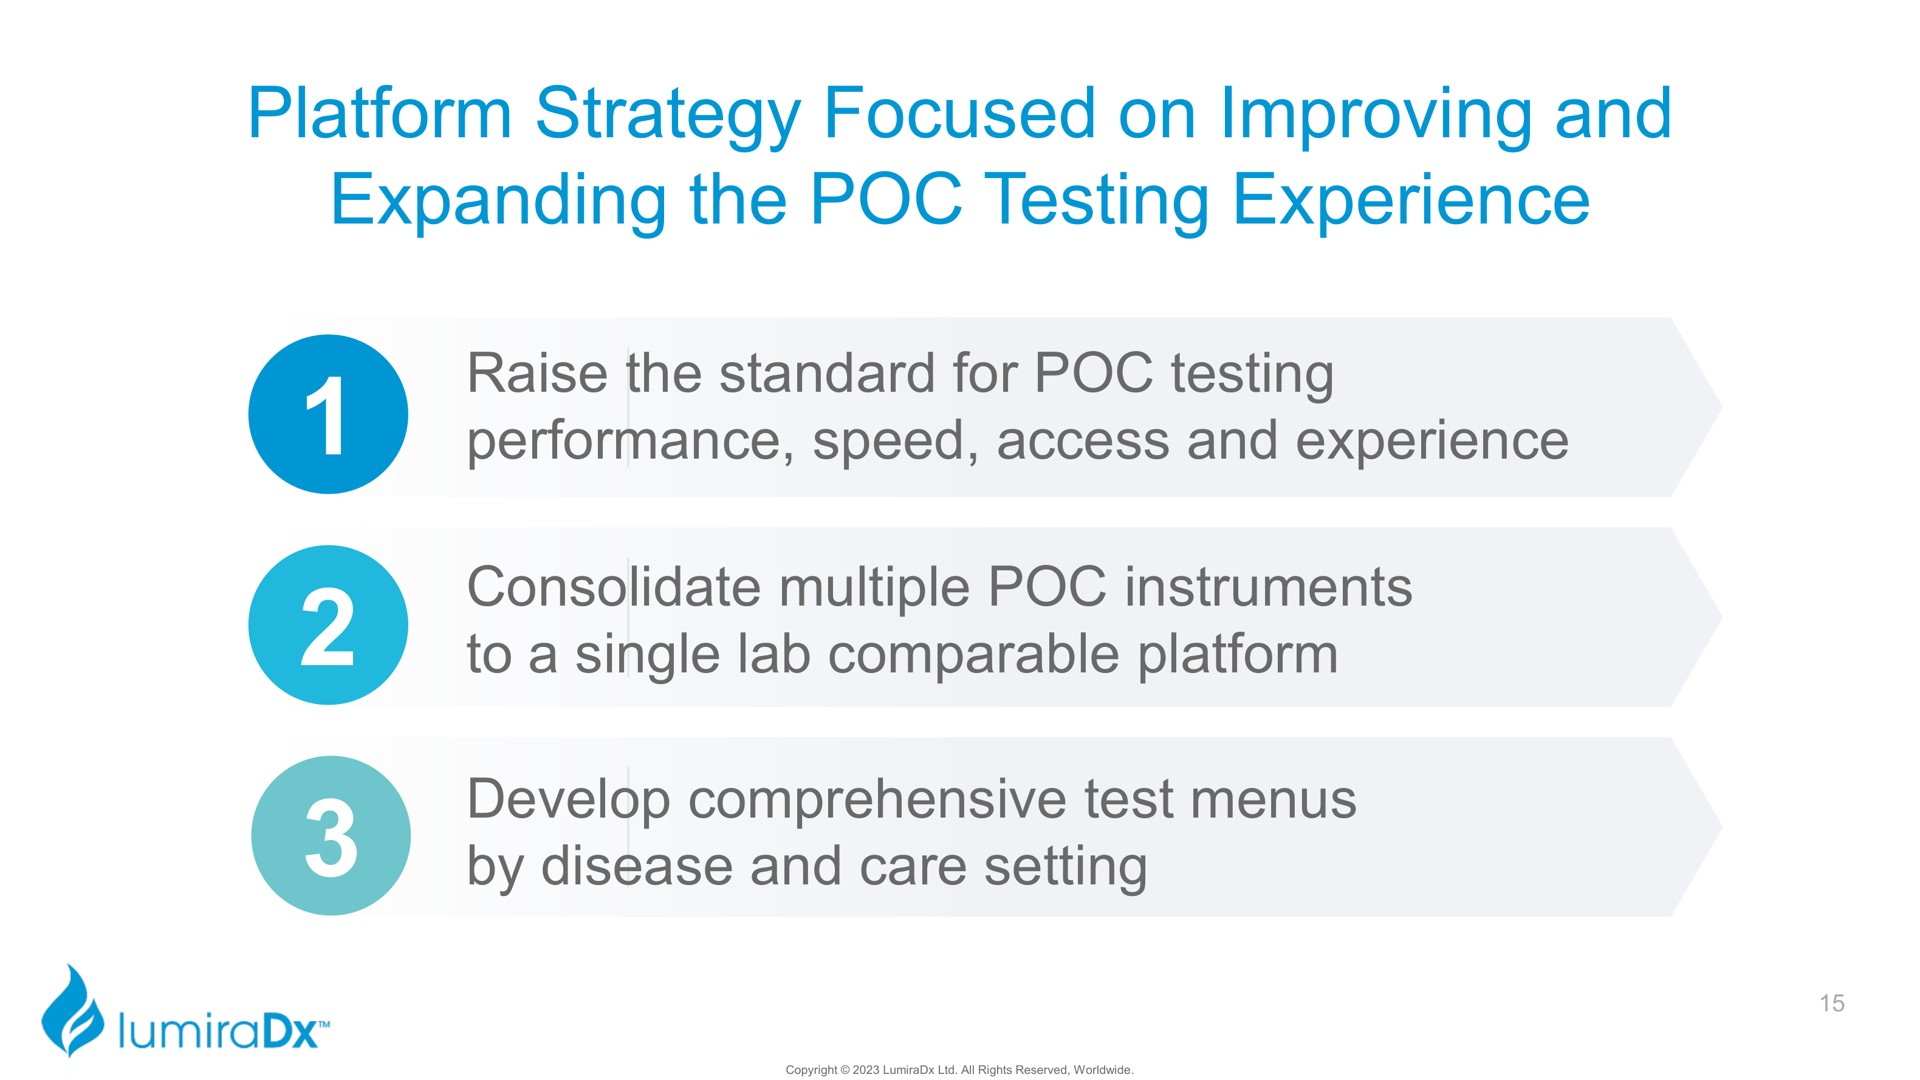 platform strategy focused on improving and expanding the testing experience | LumiraDx